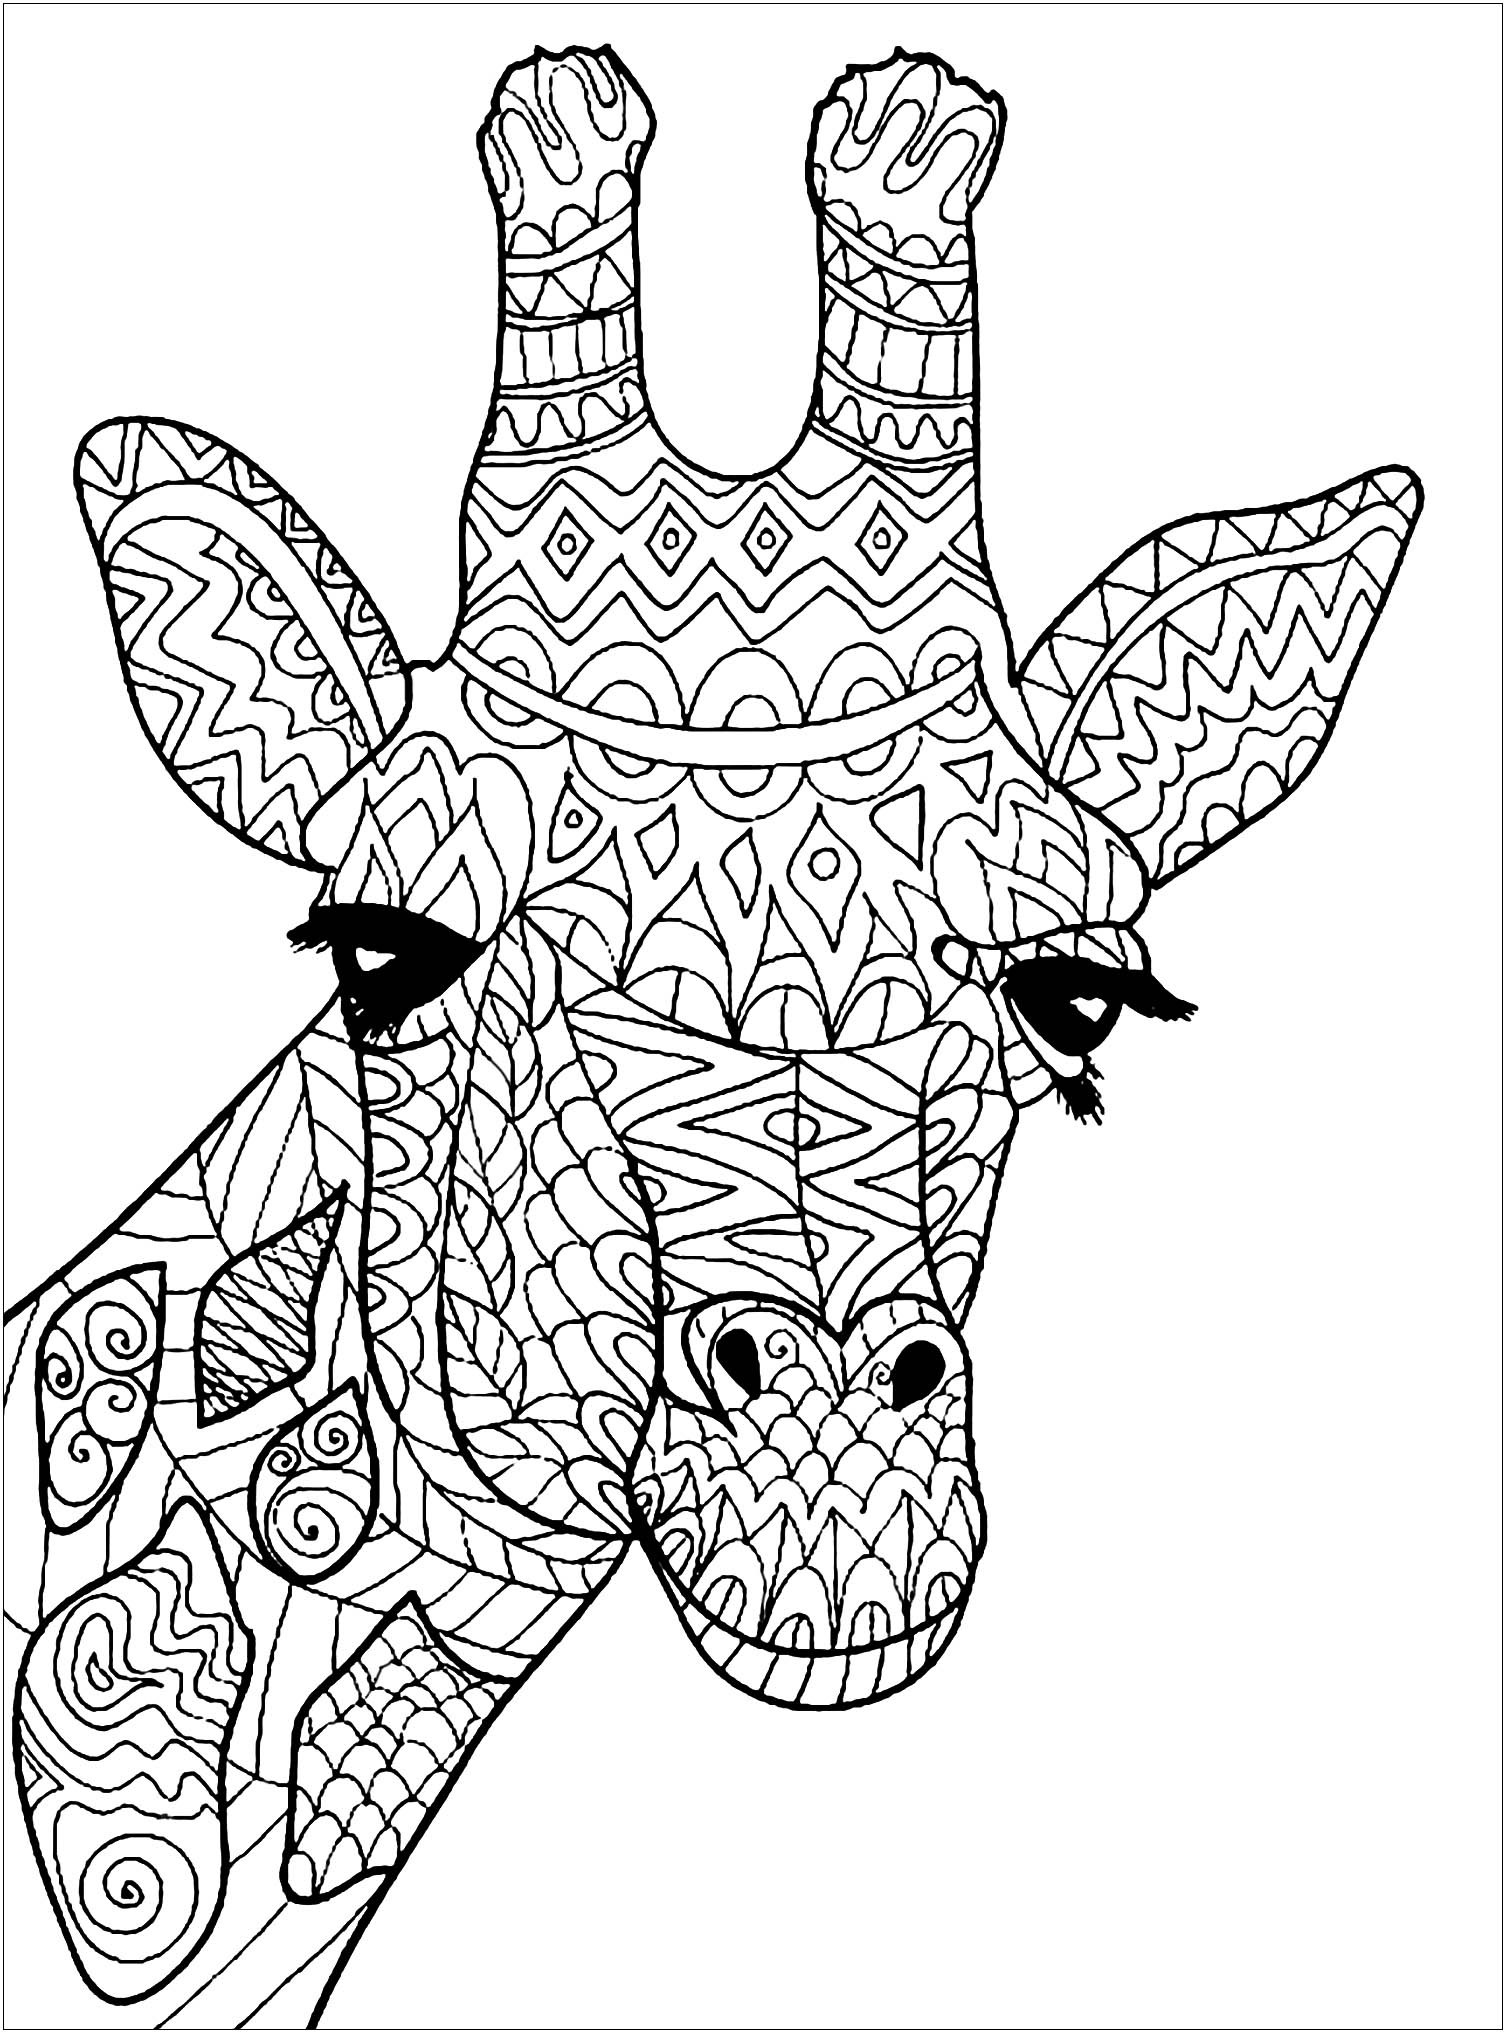 Giraffe Coloring Pages For Adults
 Giraffe head Giraffes Adult Coloring Pages